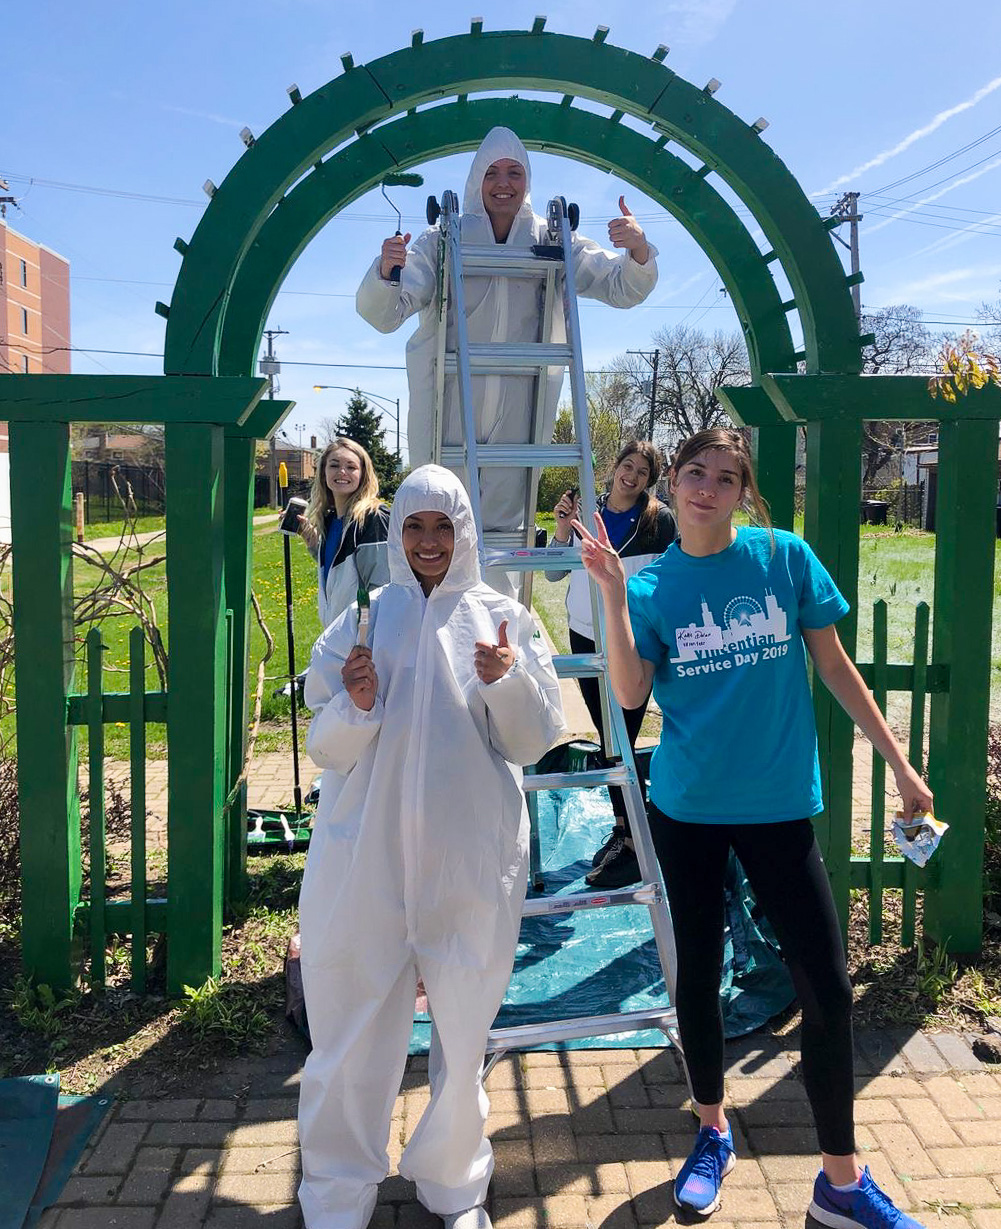 Mattie Norris, Mackenzie Savage, Brittany Maxwell, Natalie Hayward and Katie Dolan, players on the women’s Volleyball team, painted exterior fencing at Neighbor Space – Chicago. (DePaul University Athletics)